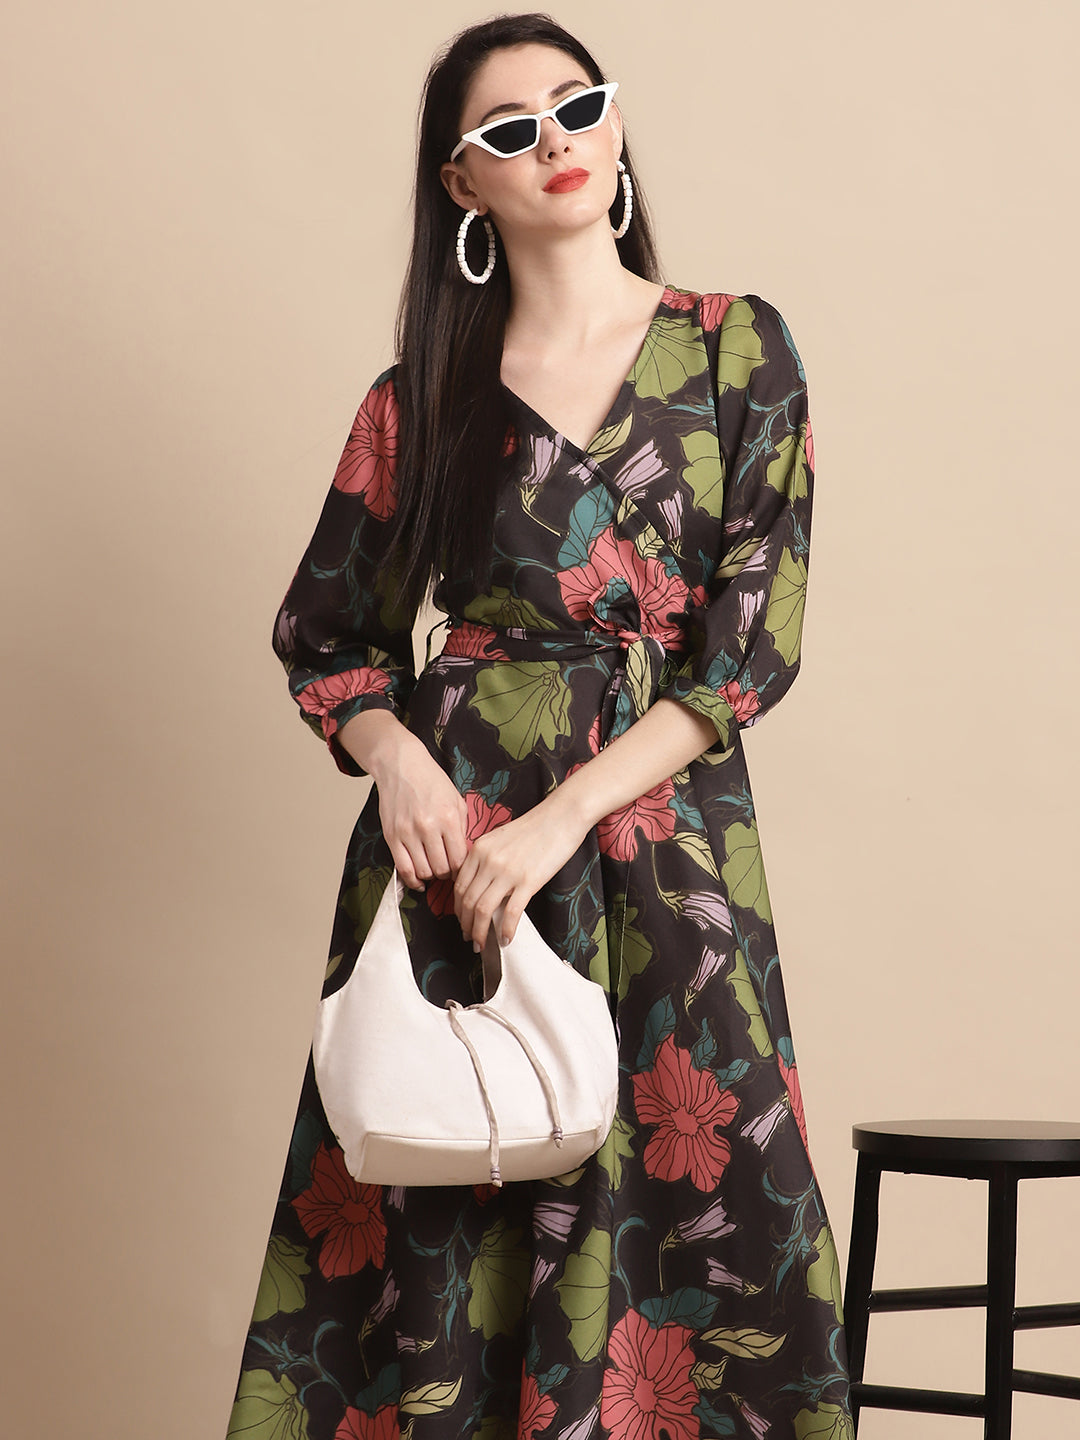 Women's Black Floral Printed A-line Dress With Belt